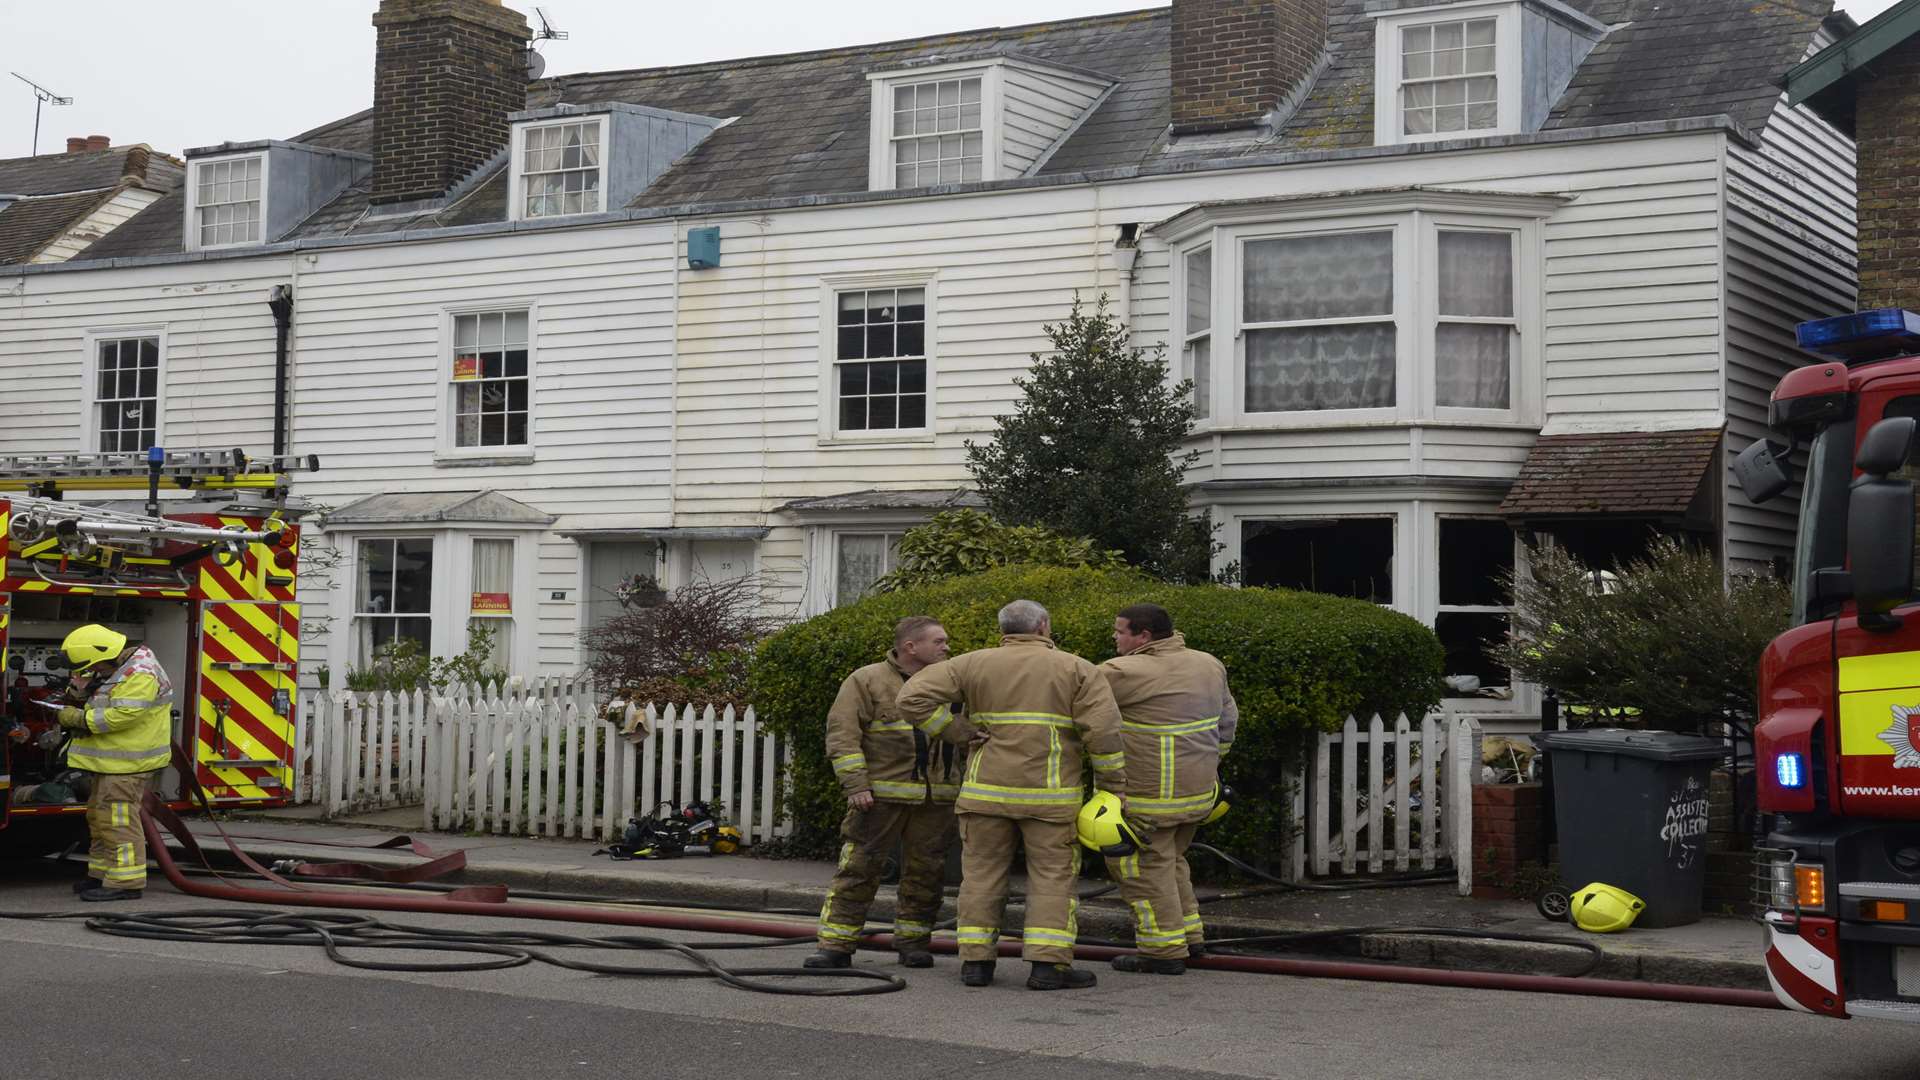 Crews were called to a house in Canterbury Road, on the corner of Swanfield Road